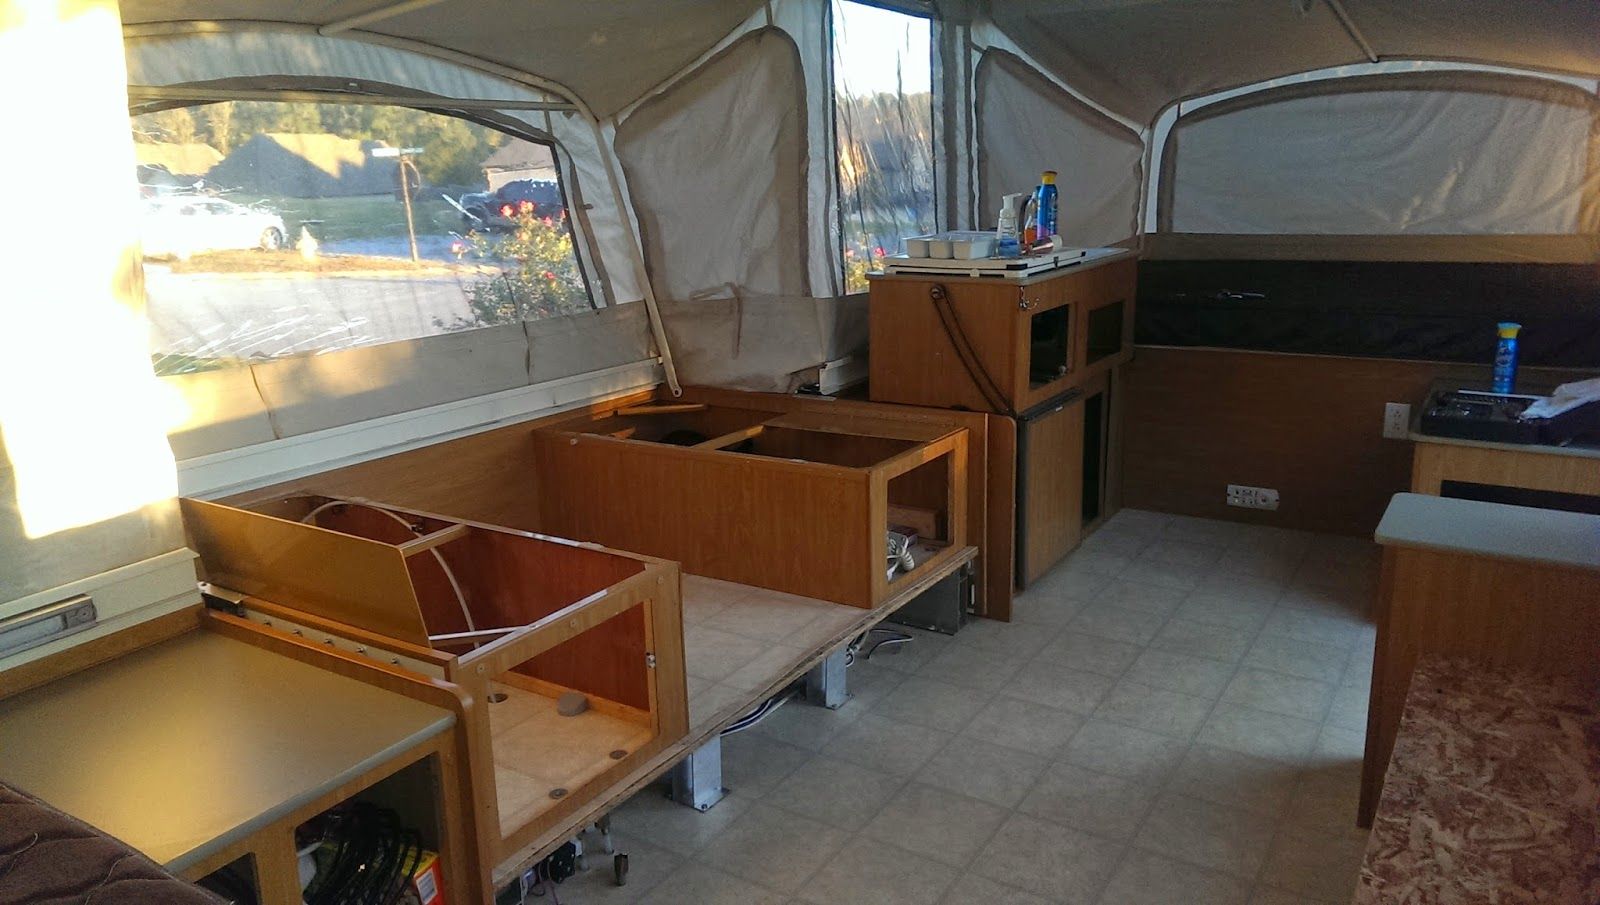 This is our one week pop-up camper remodel!